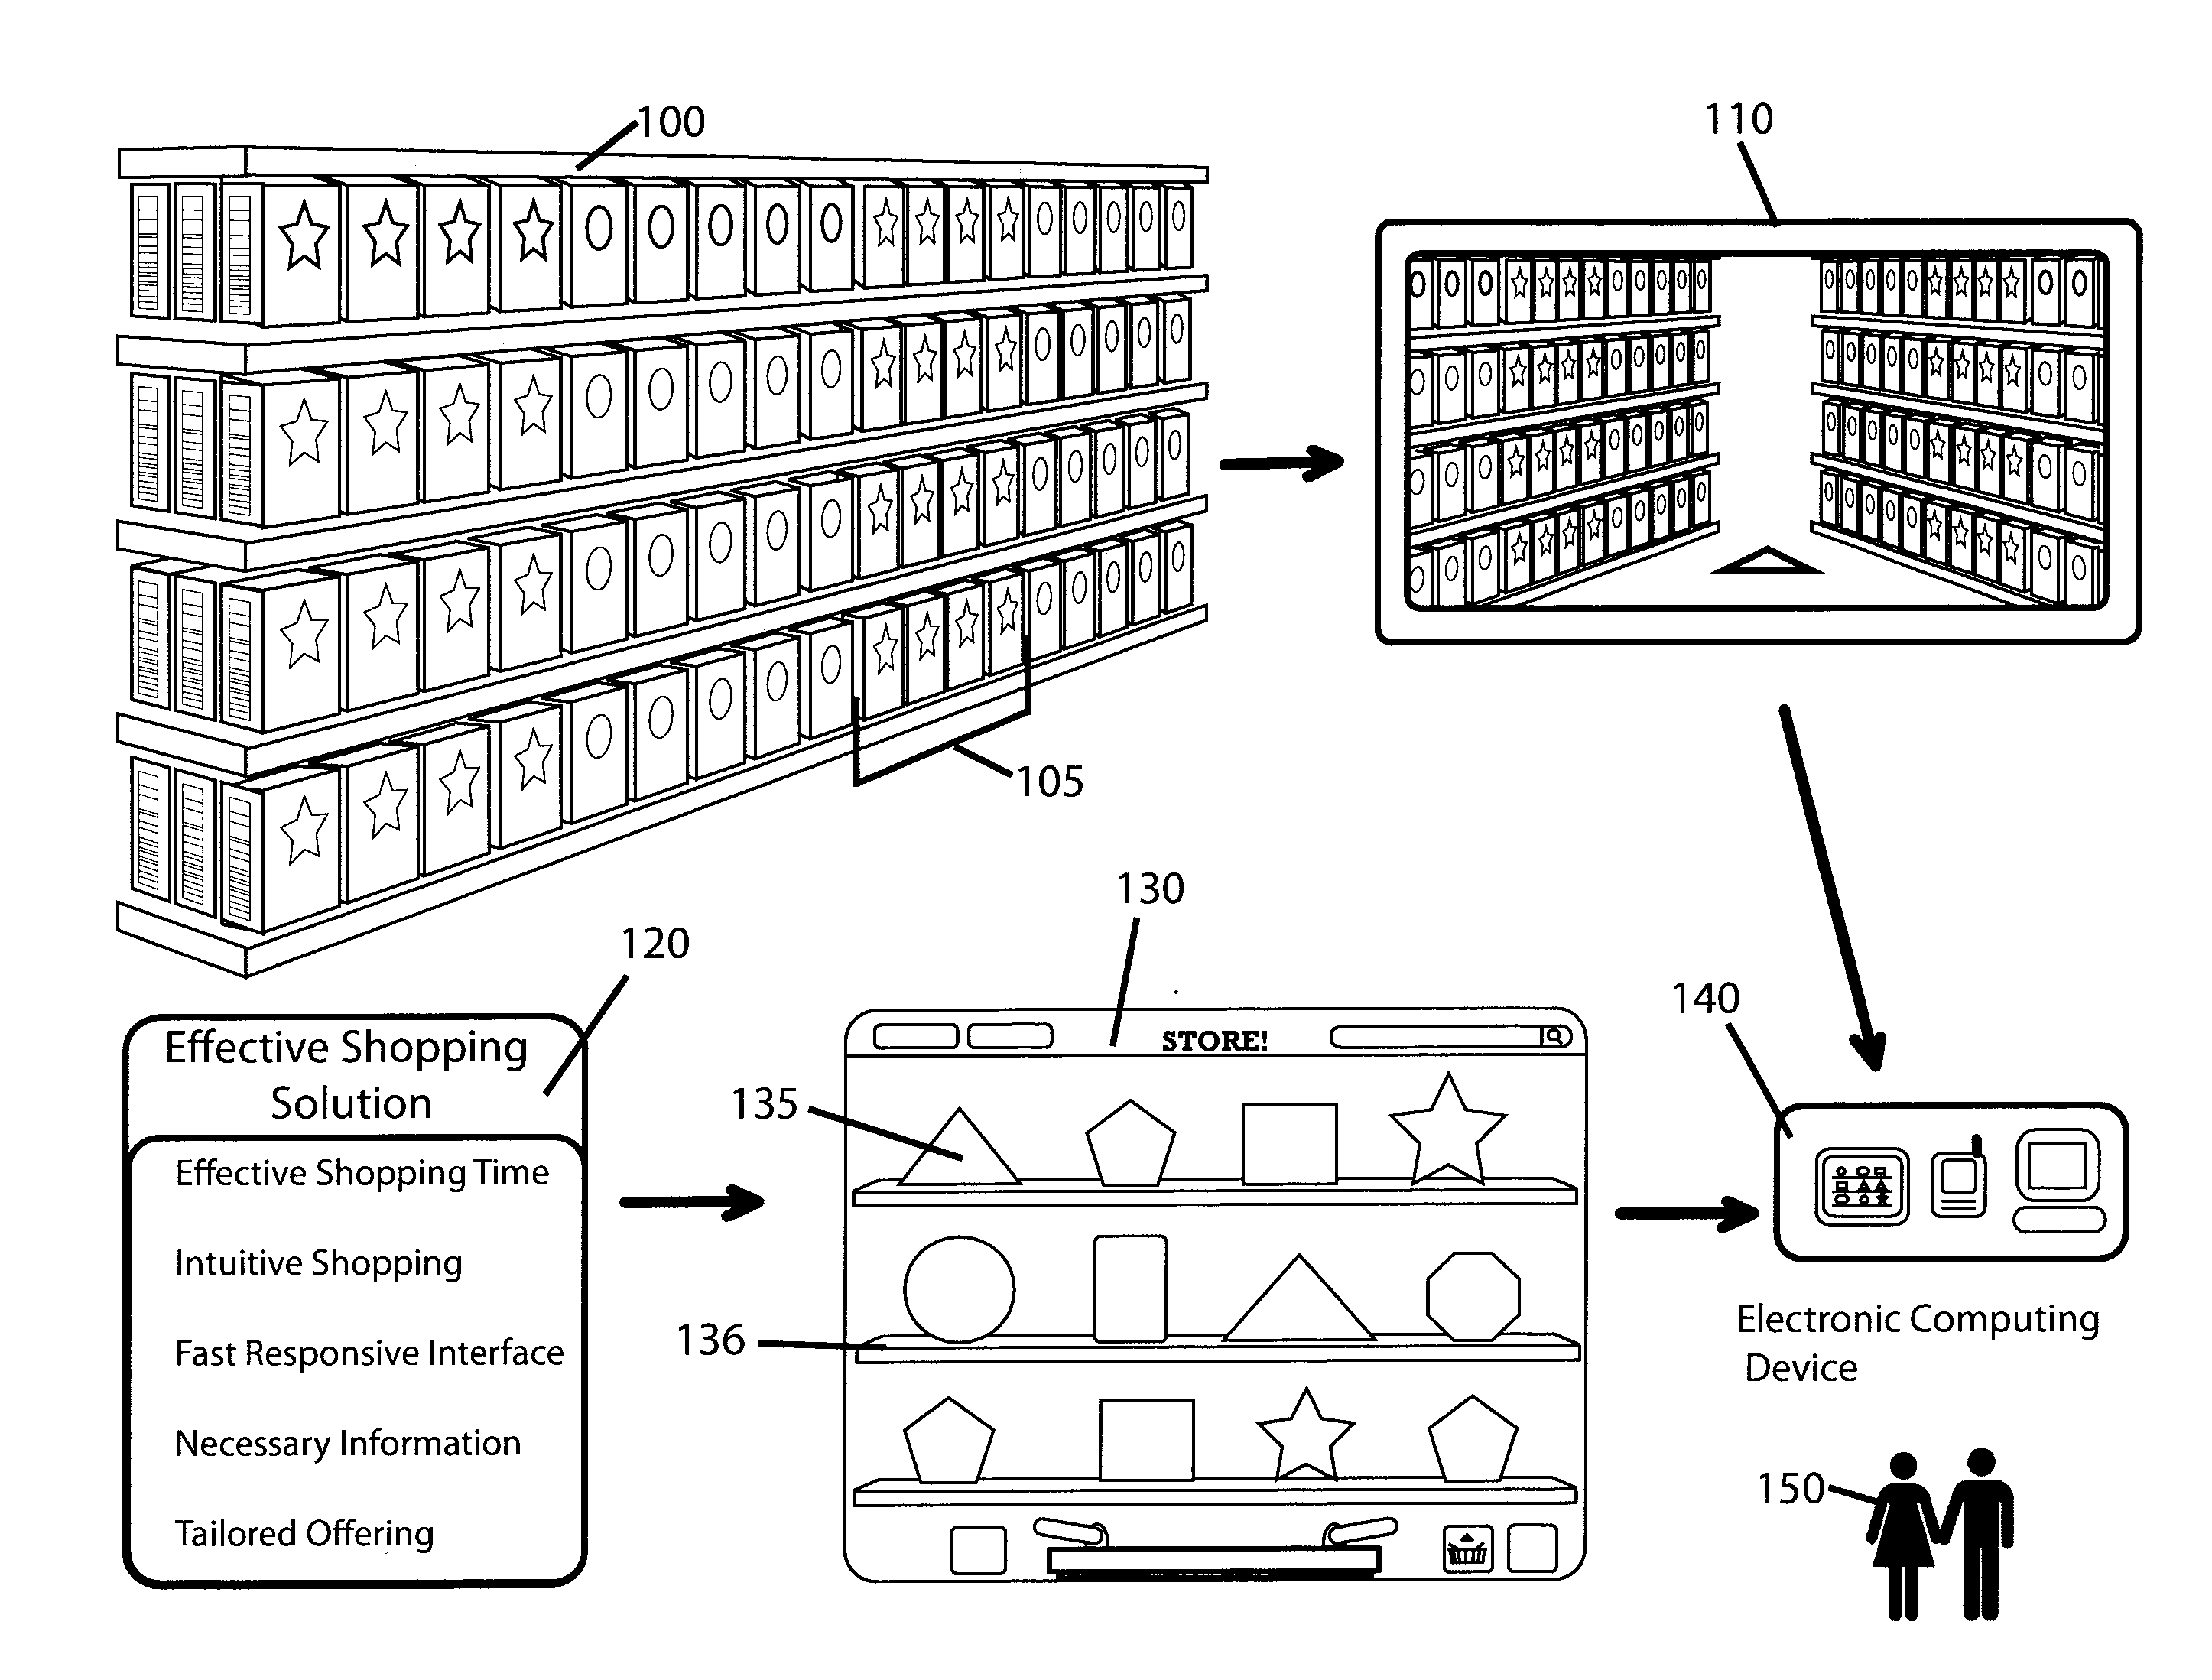 System and Method for Shopping Goods, Virtualizing a Personalized Storefront